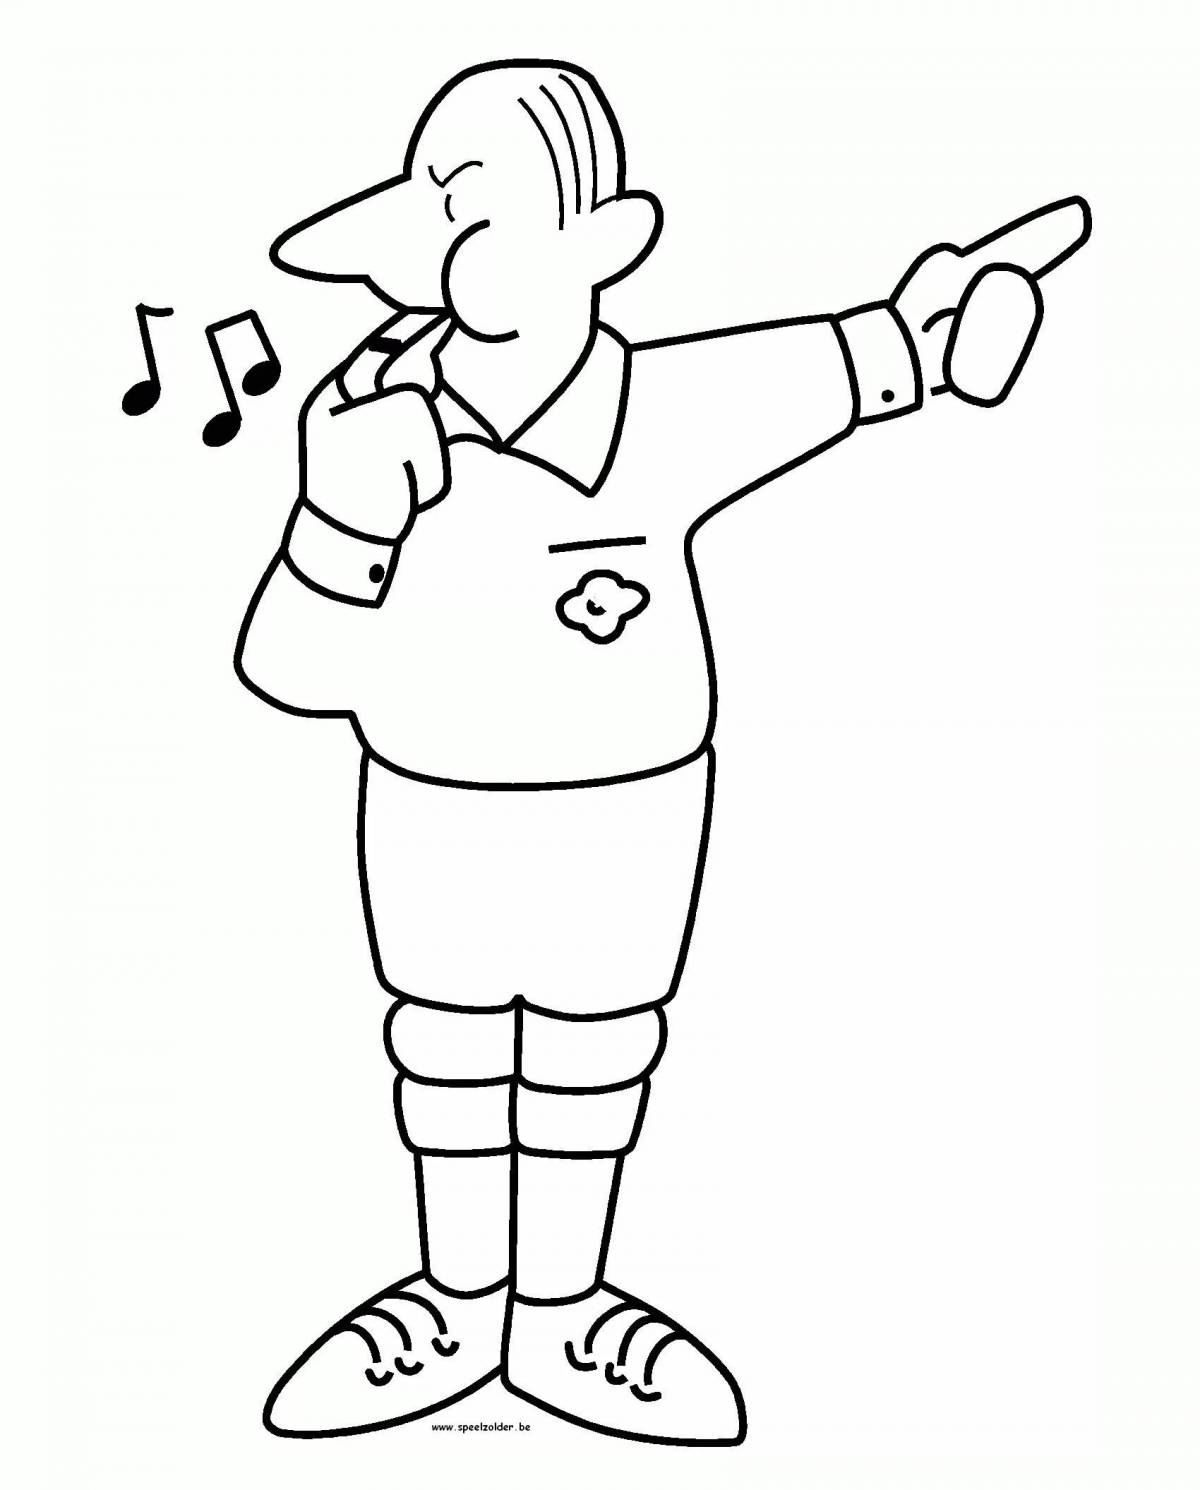 Coloring page dazzling coach